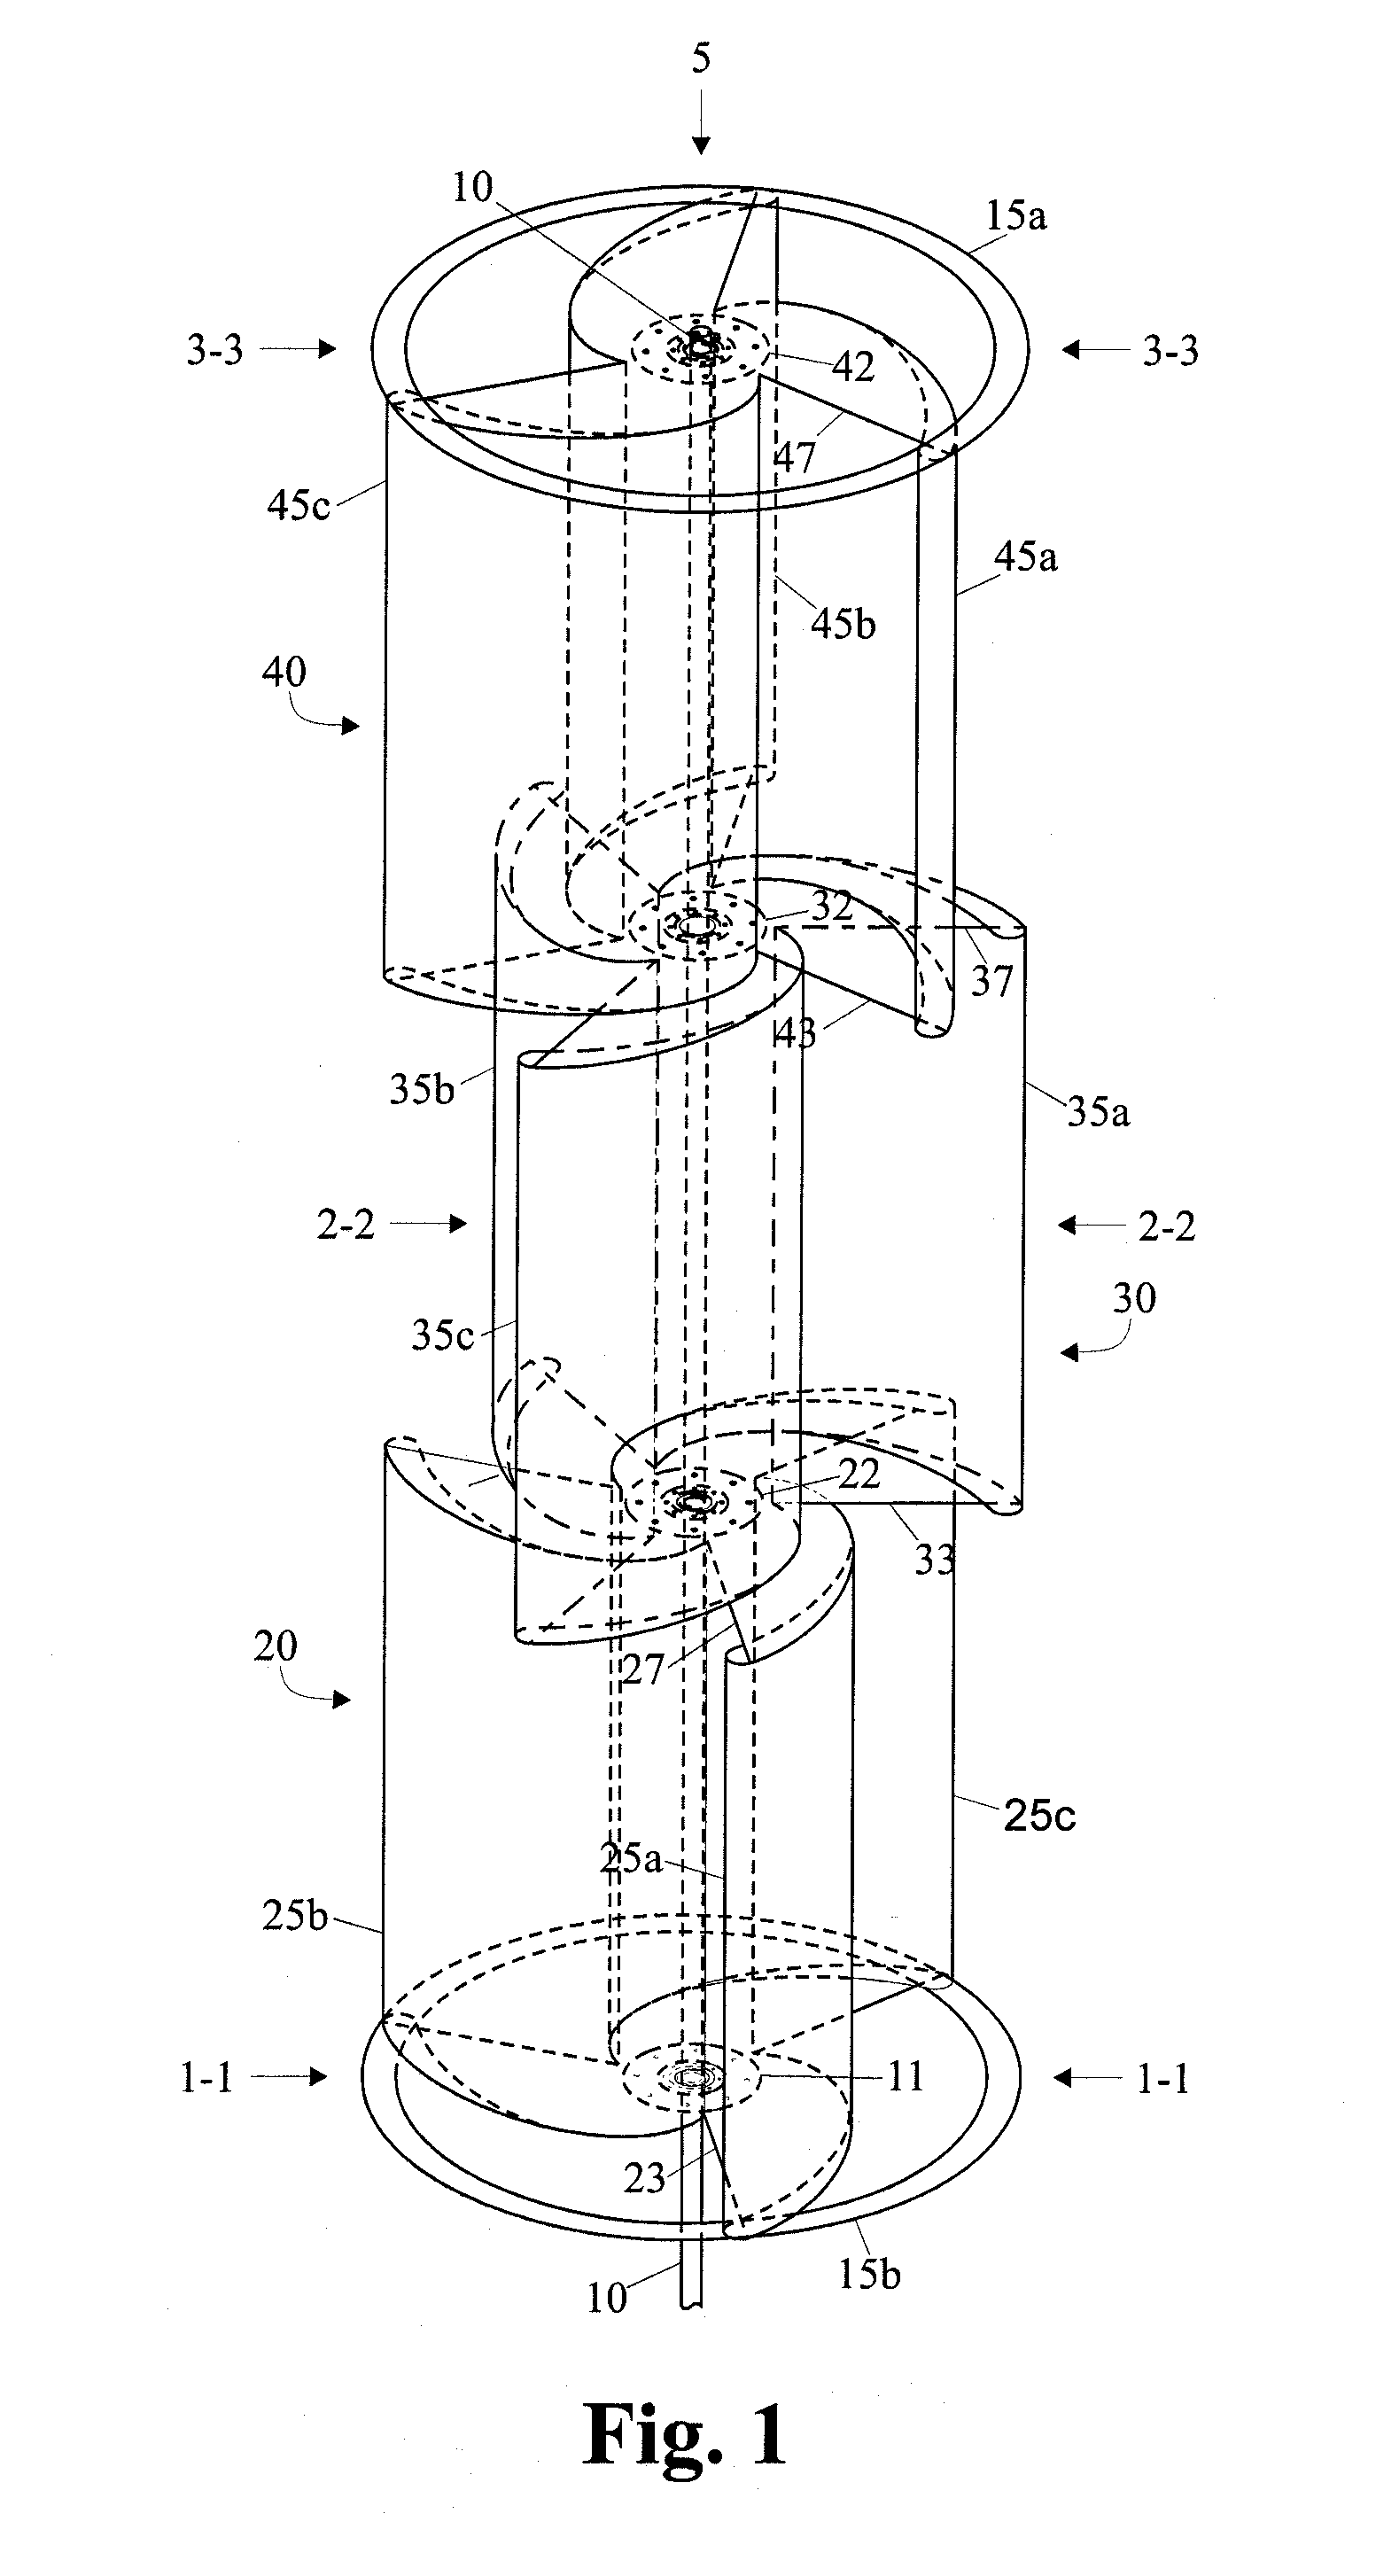 Vertical-axis wind turbine having logarithmic curved airfoils